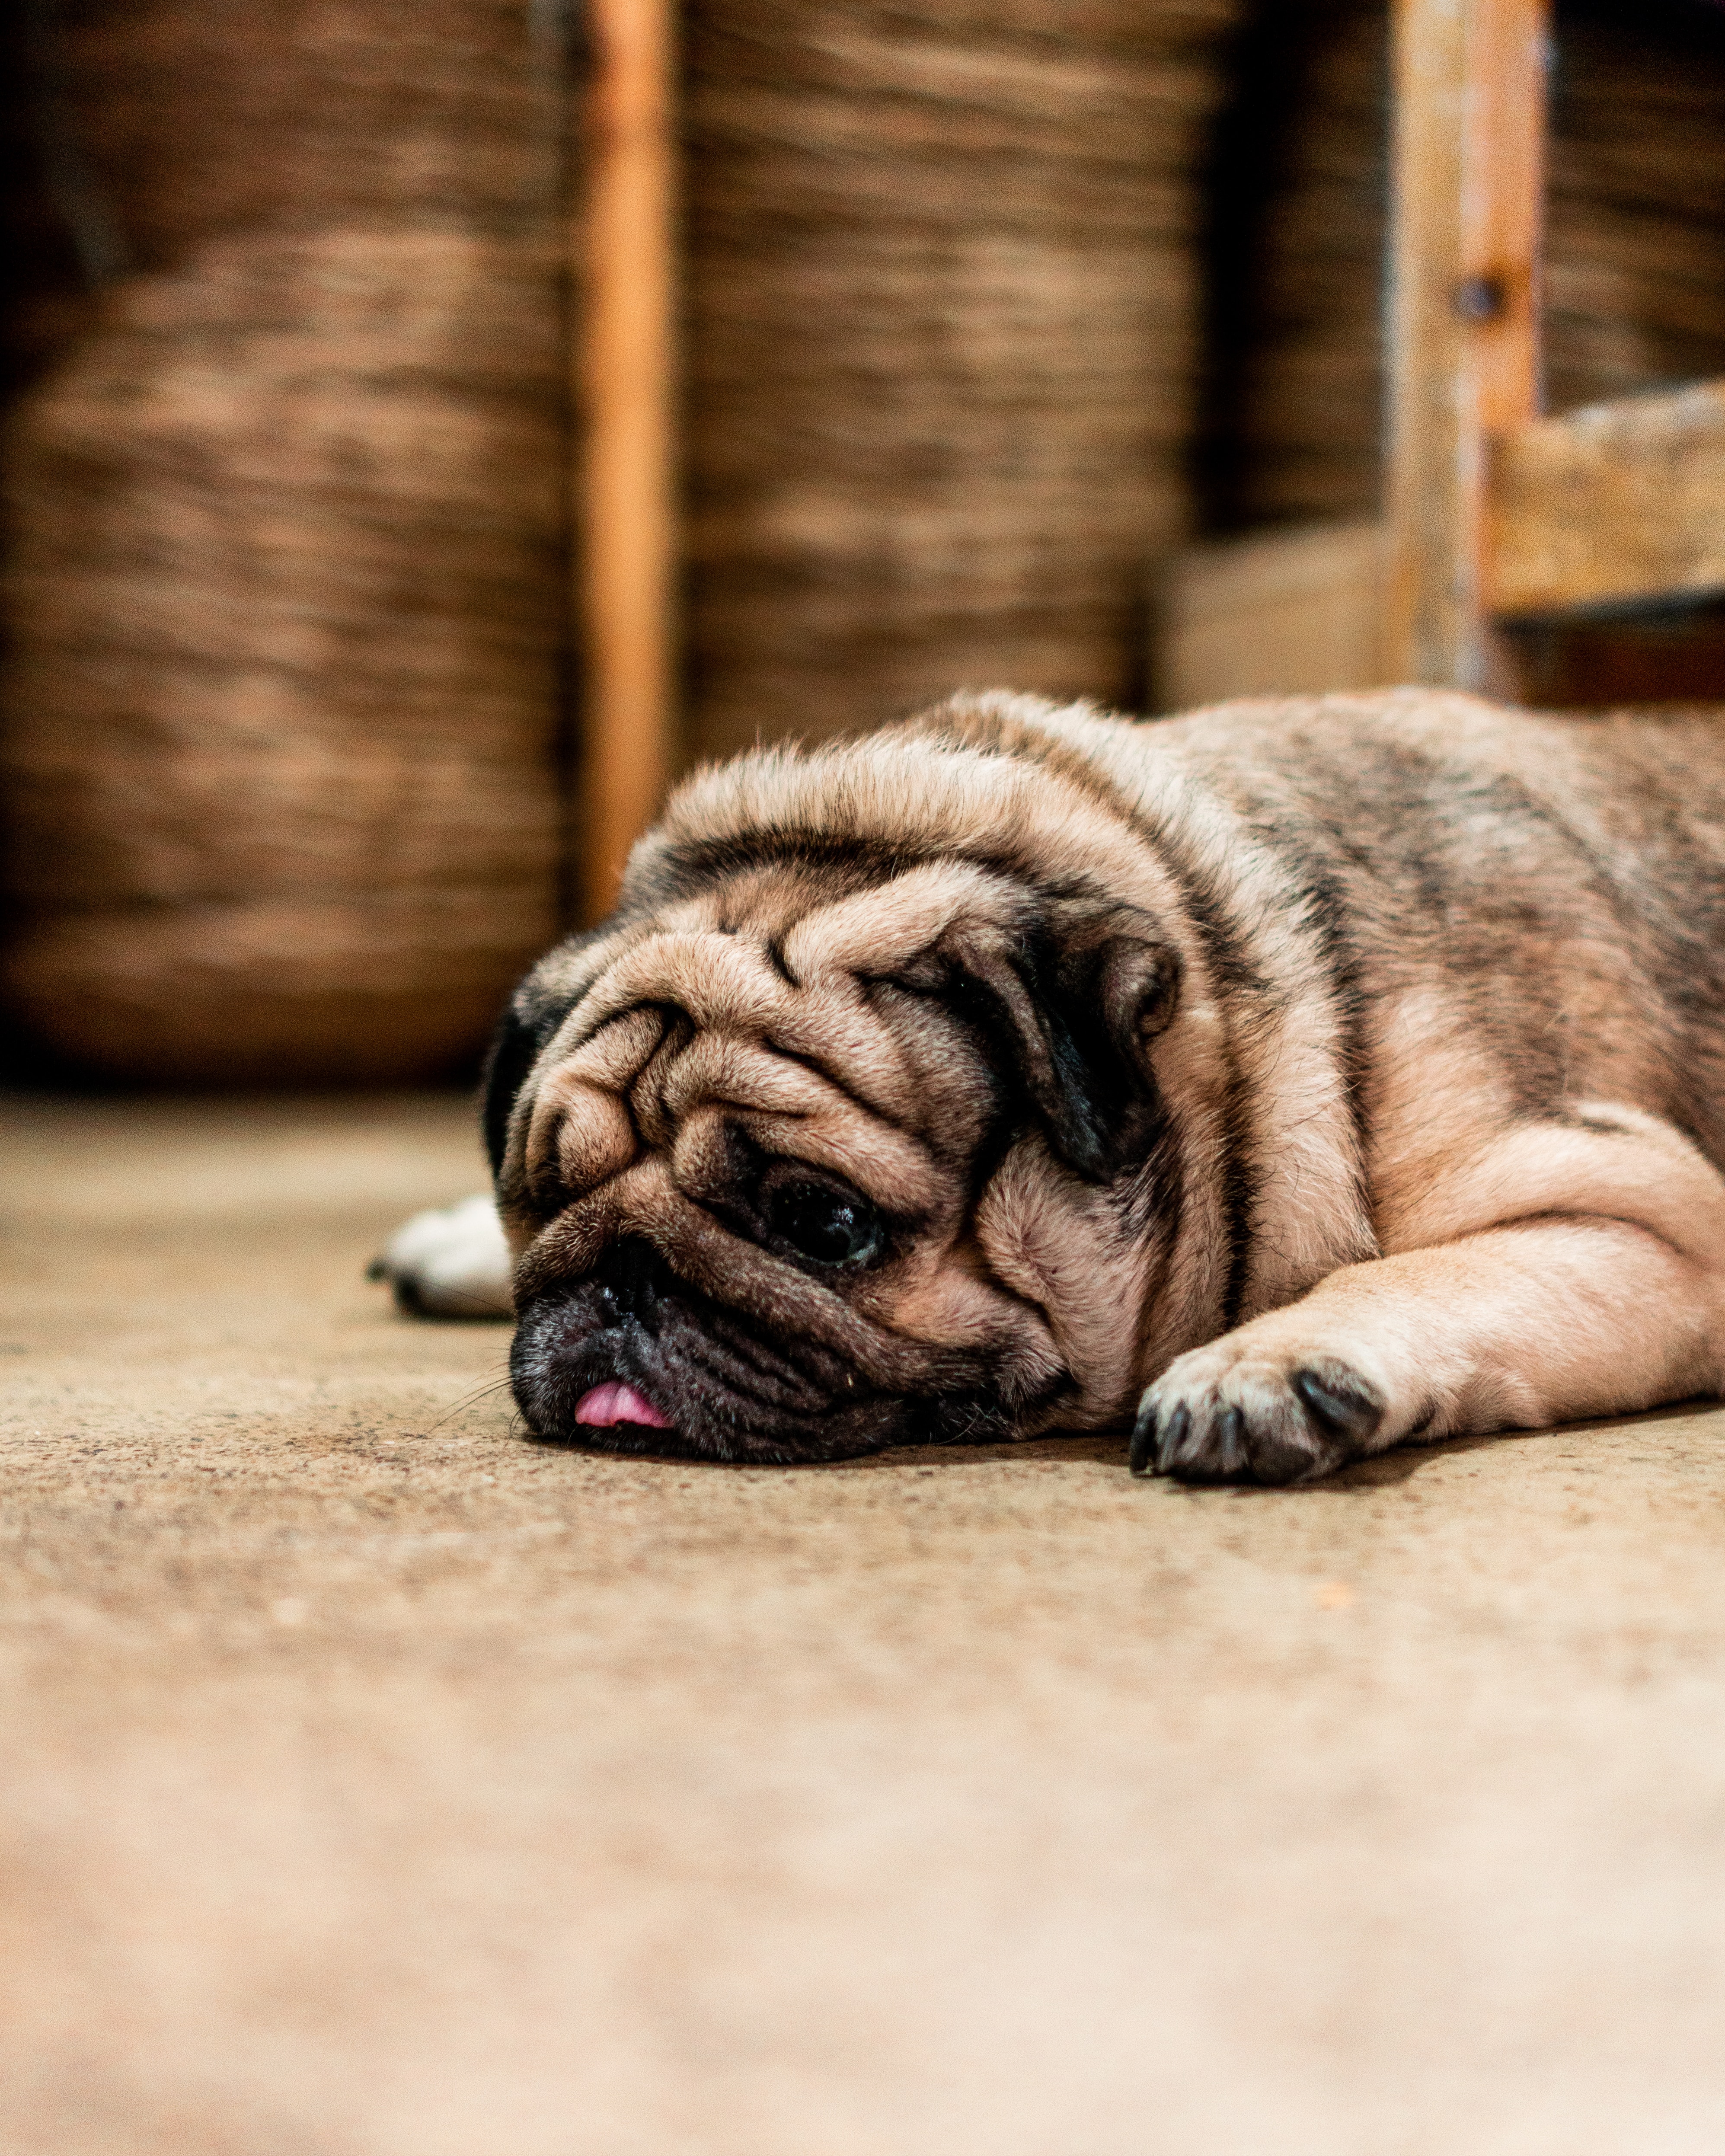 pug, animals, dog, pet, sadness, protruding tongue, tongue stuck out, sorrow wallpapers for tablet